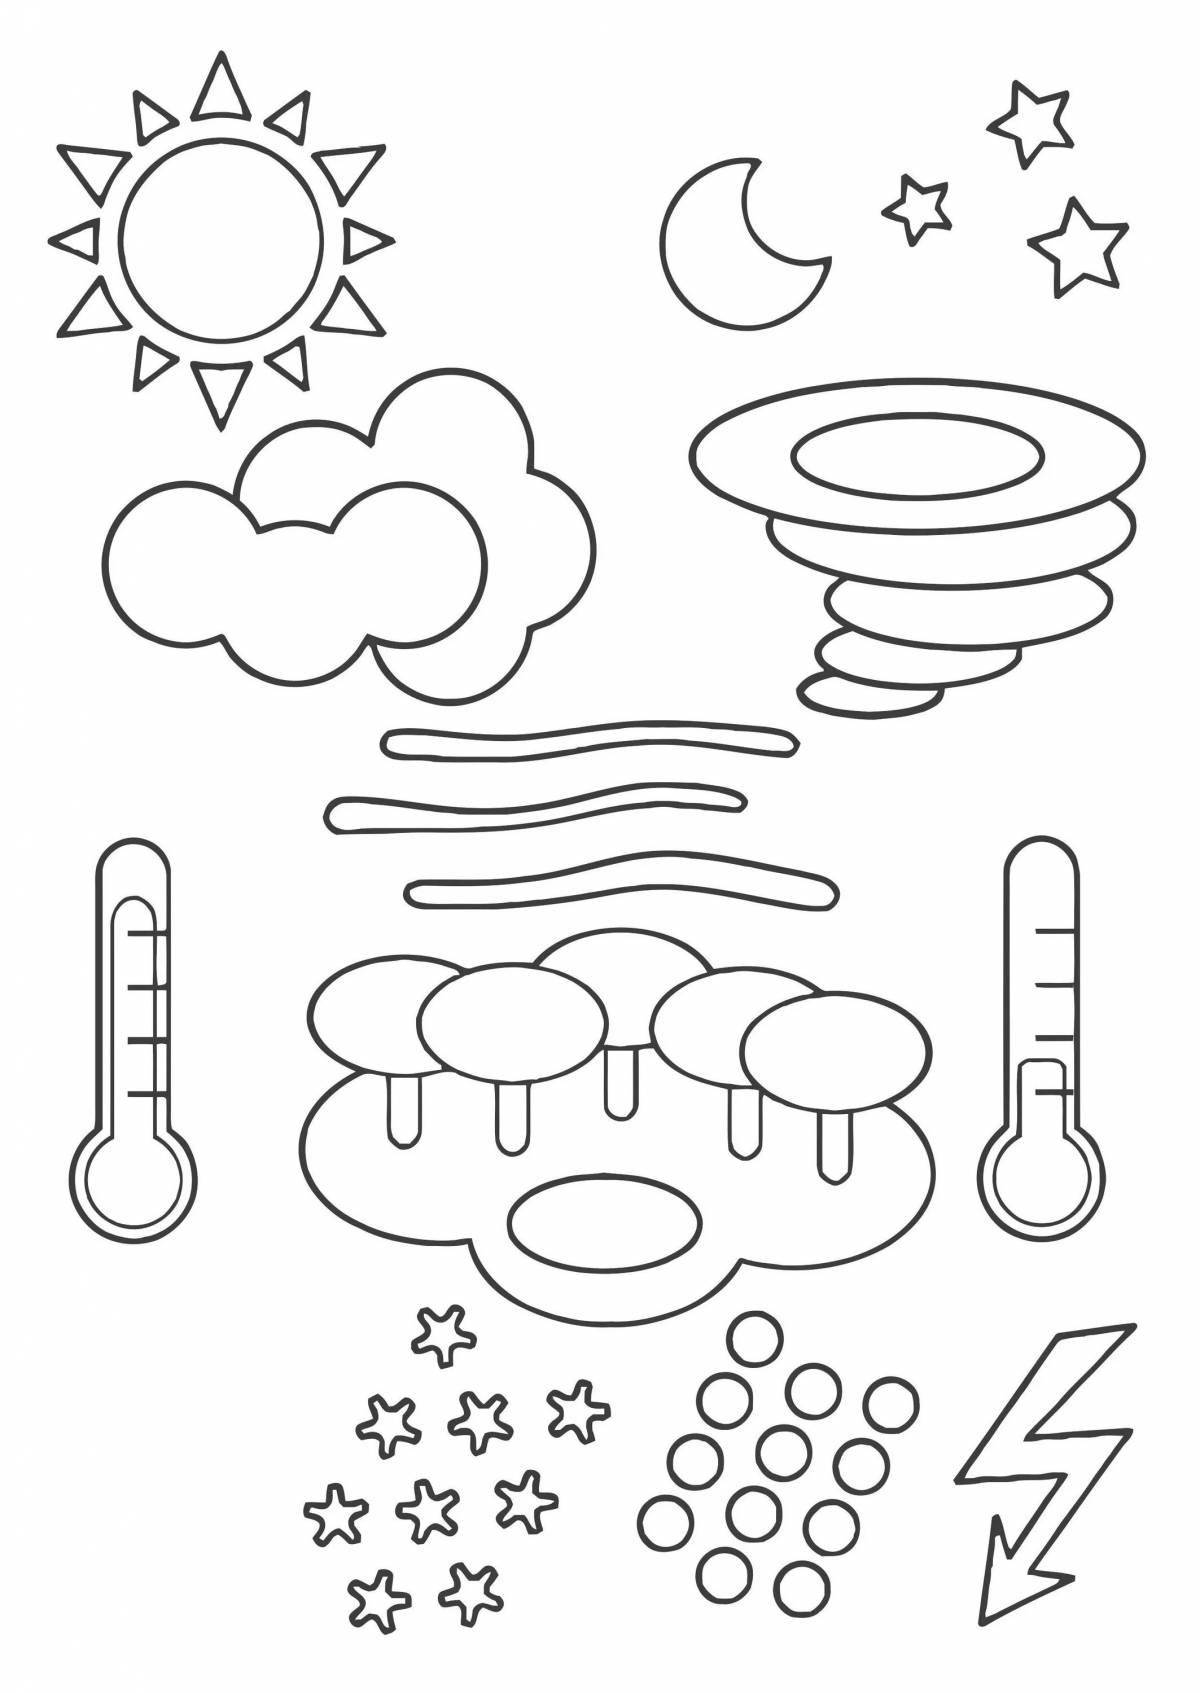 Color-frenzy weather forecast coloring book